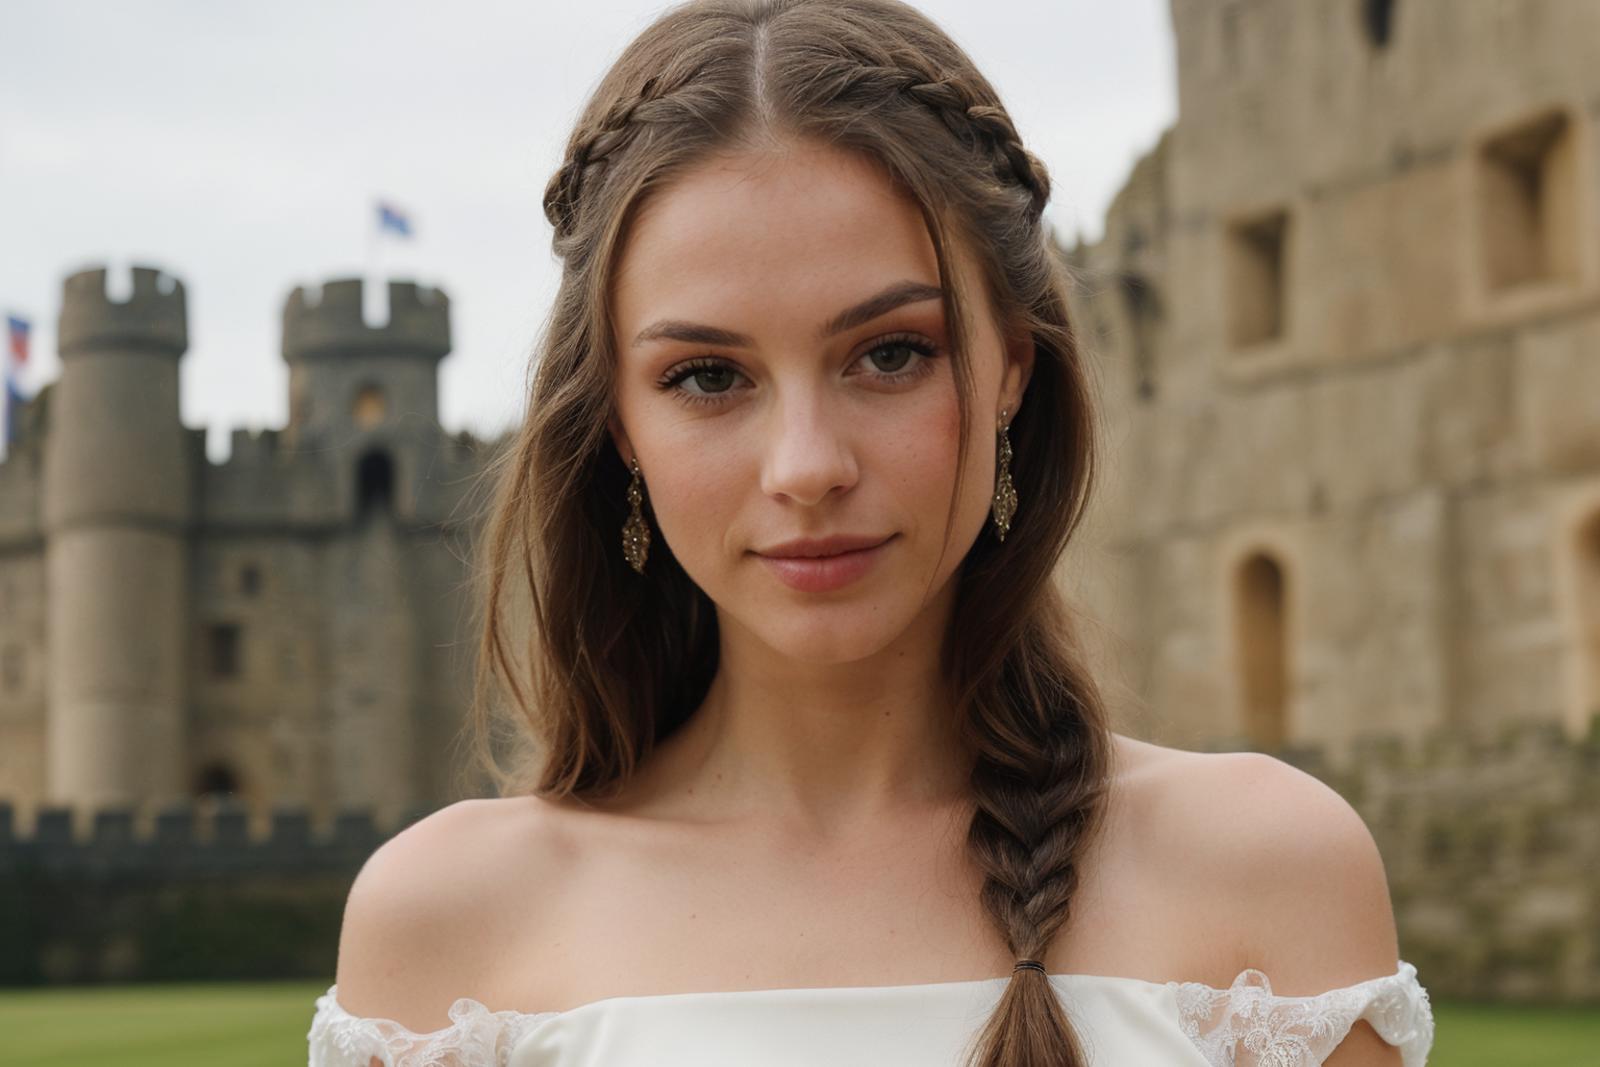 A woman wearing a braid and earrings poses in front of a castle.